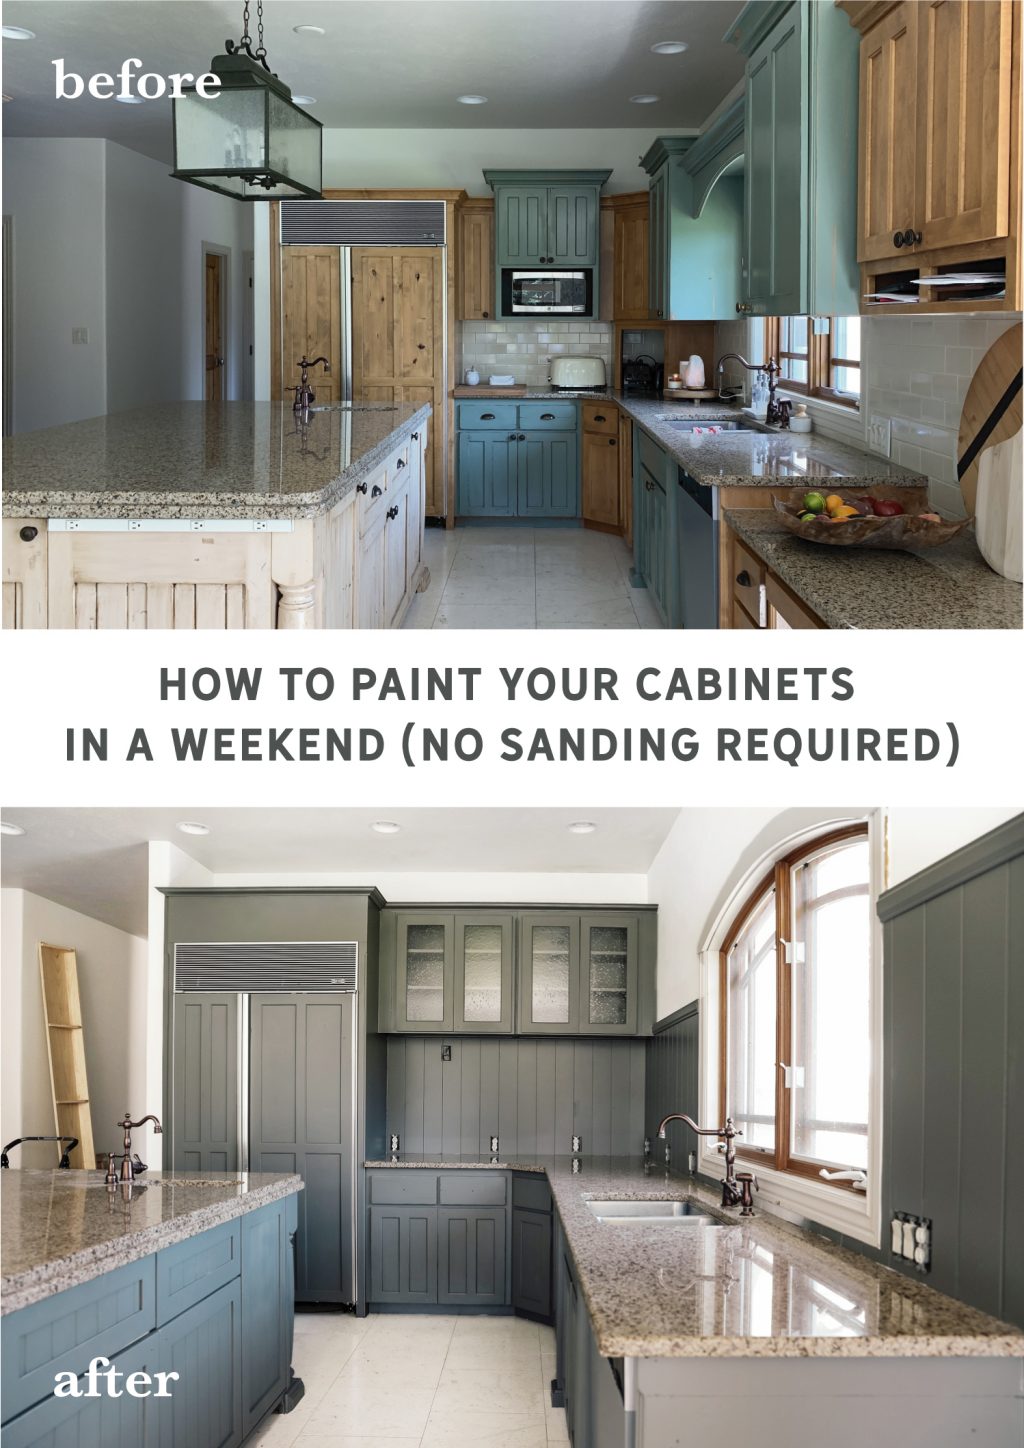 How To Paint Your Cabinets In A Weekend, How To Make Kitchen Cabinets Shine After Painting